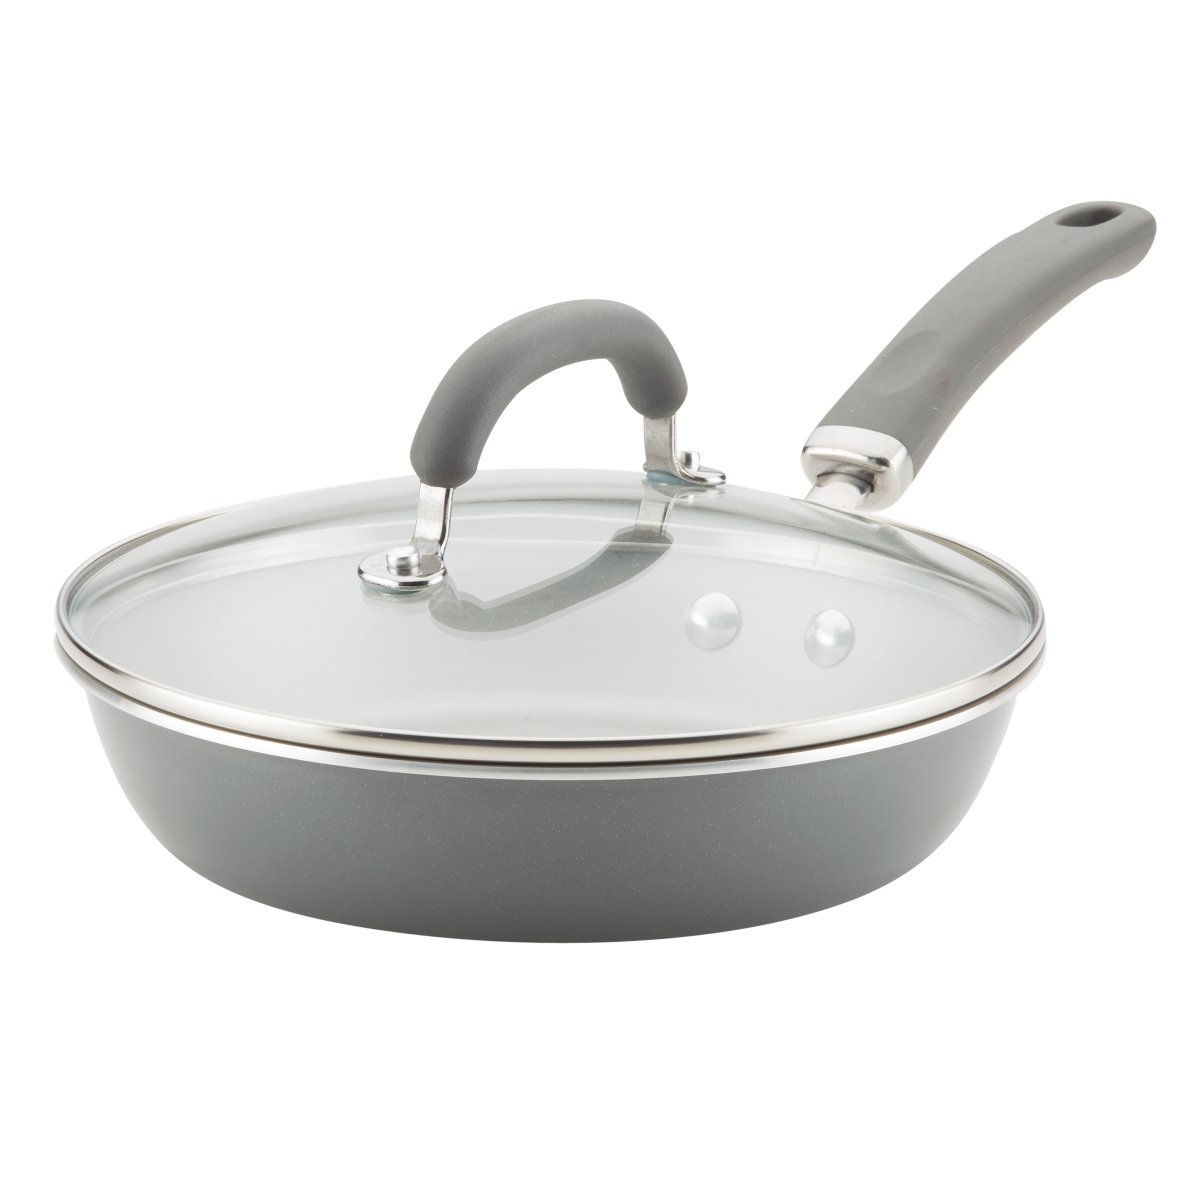 12005 Create Delicious Aluminum Nonstick Covered Deep Skillet, 9.5 In. - Gray Shimmer